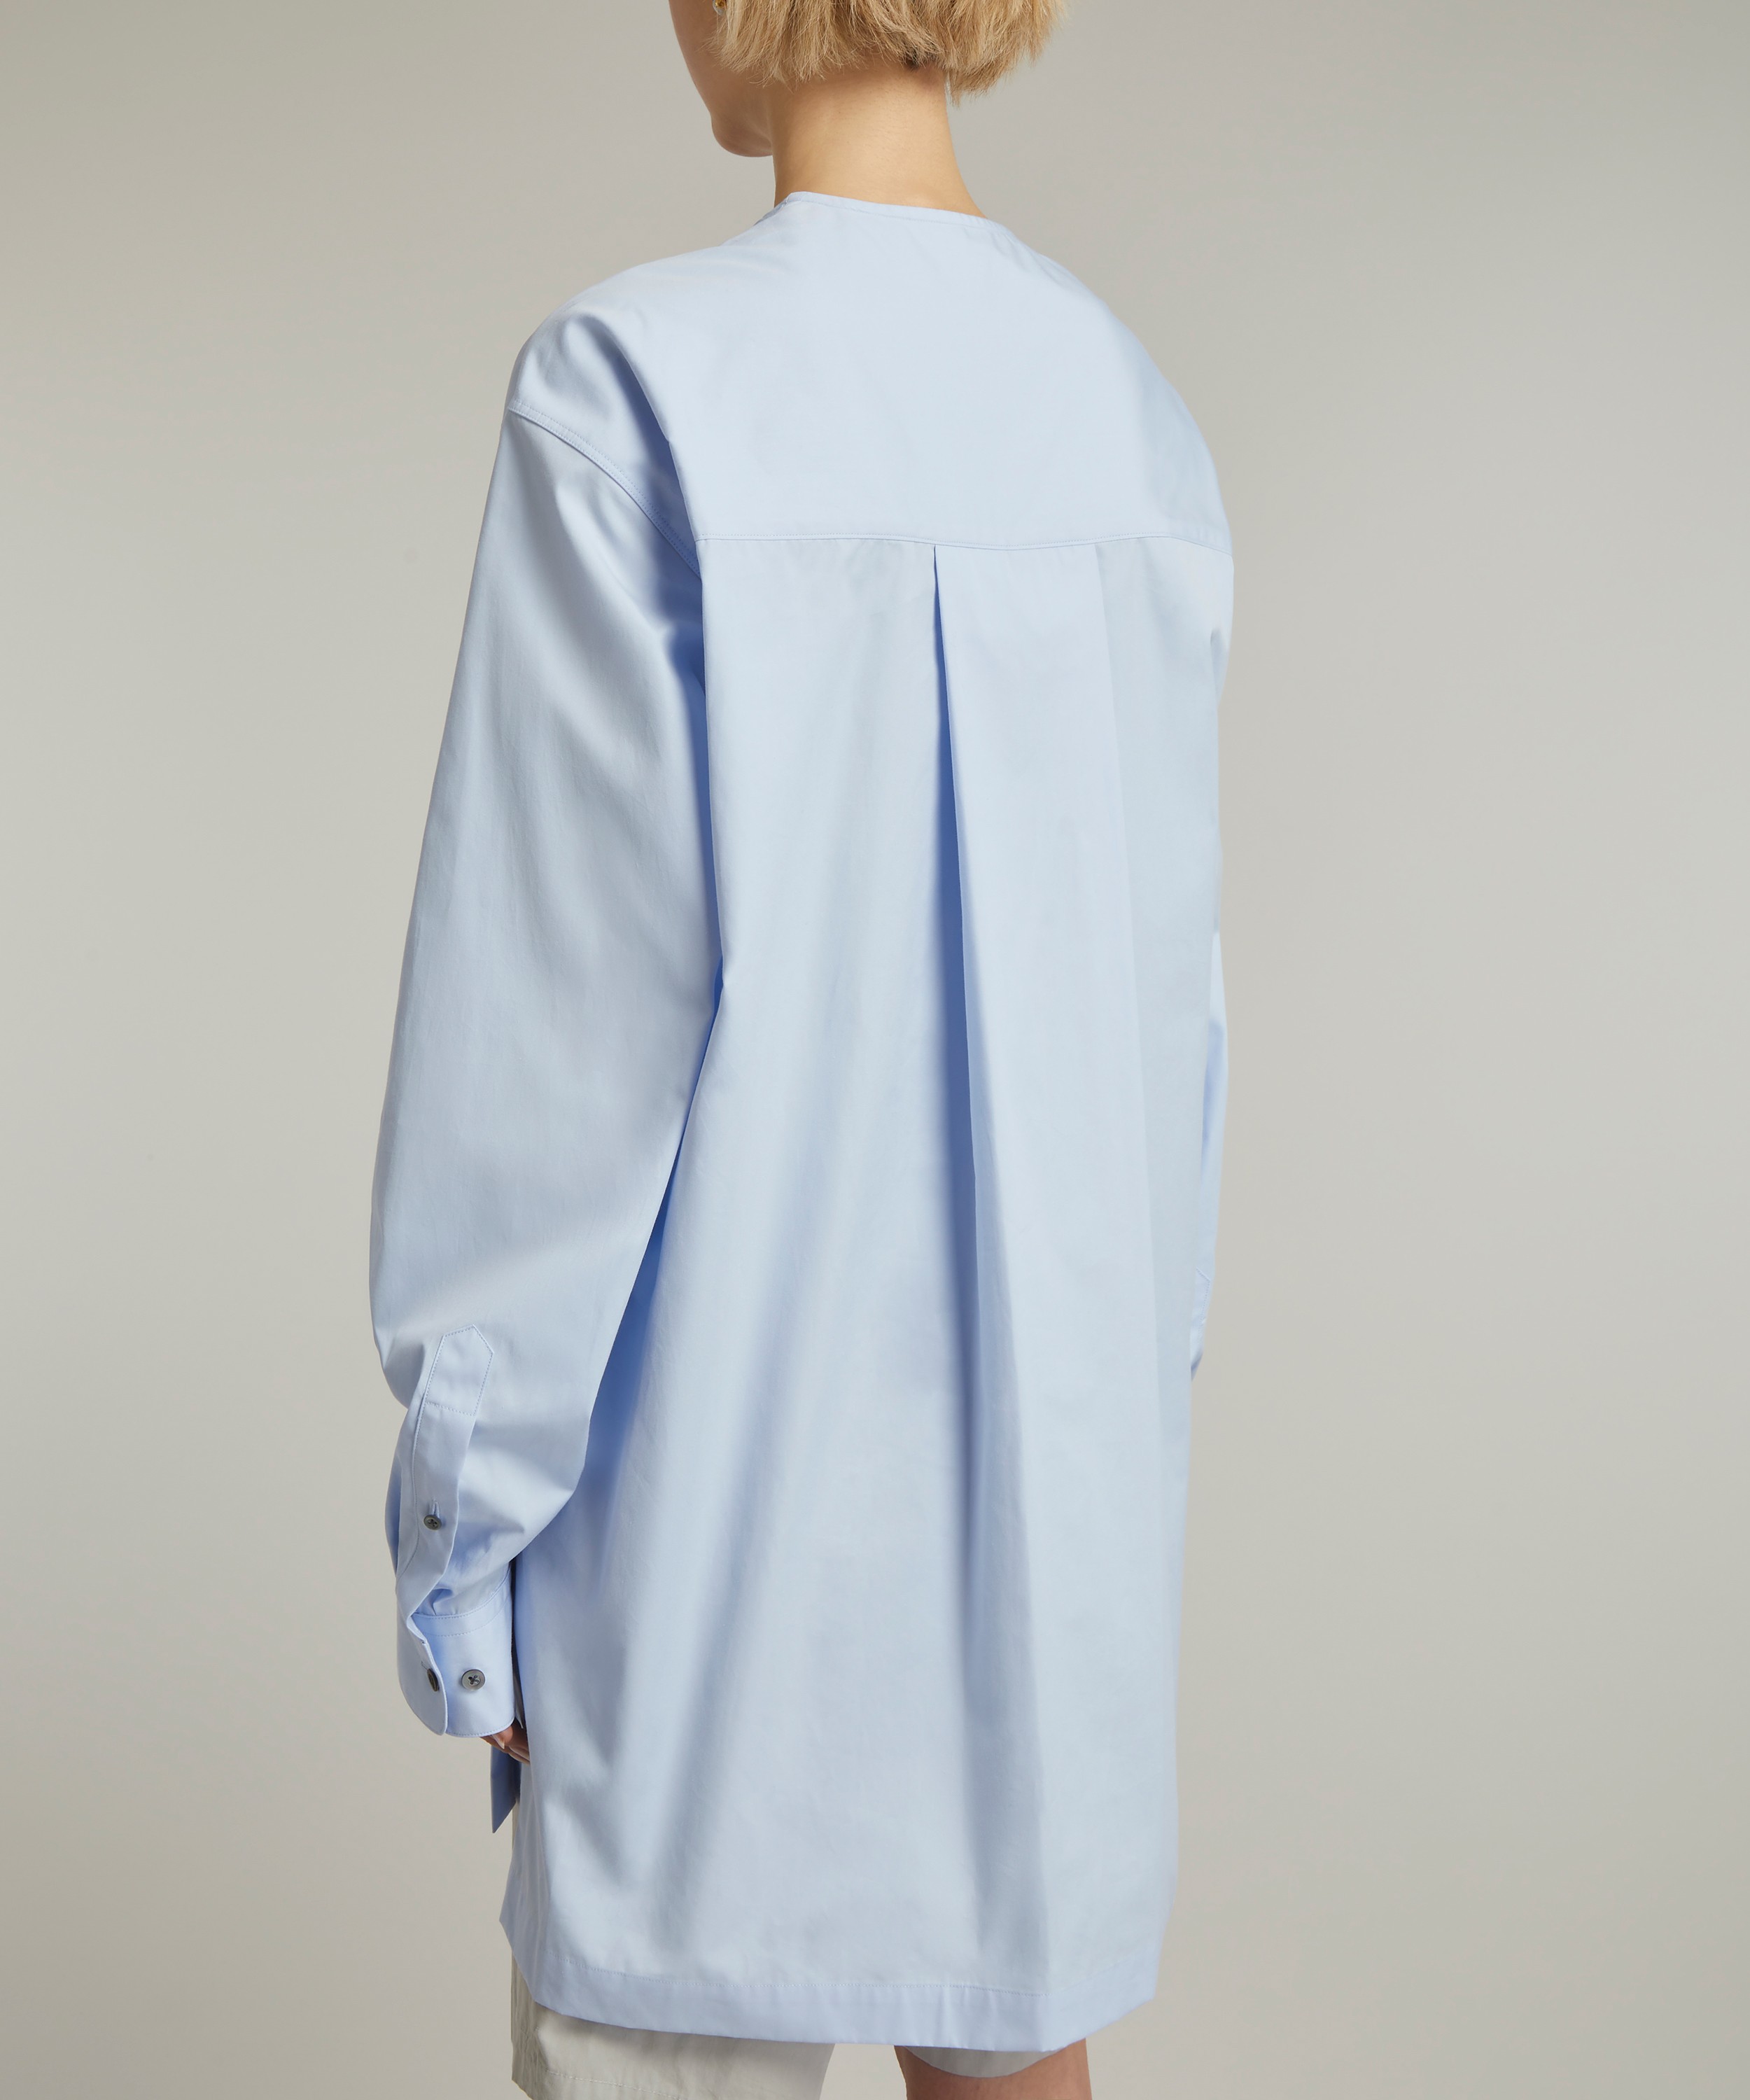 Dries Van Noten - Oversized Shirt With Bow Detail image number 3